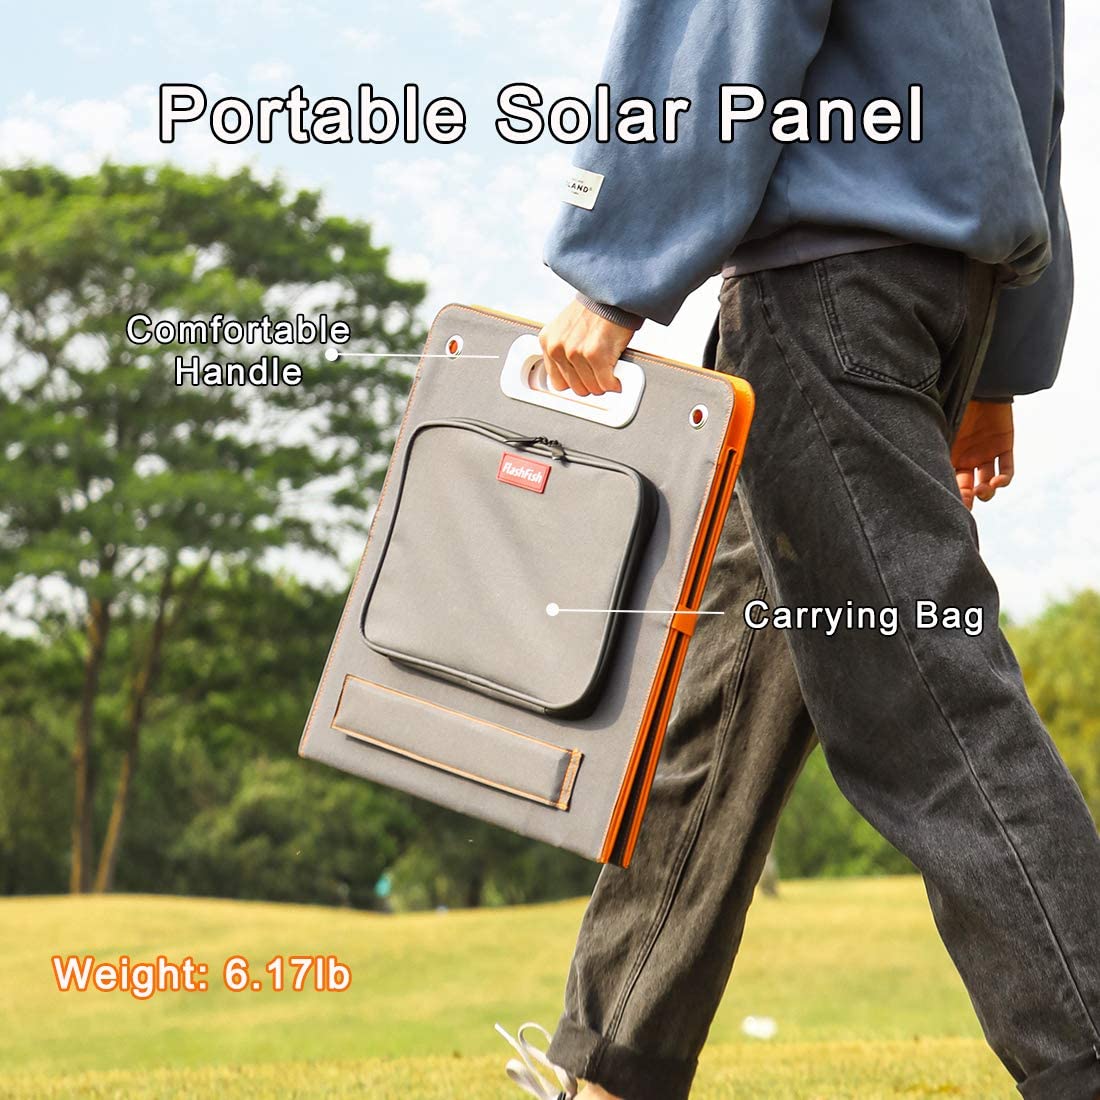 Portable Solar Panel Gomfortable Handle Carrying Bag Weight: